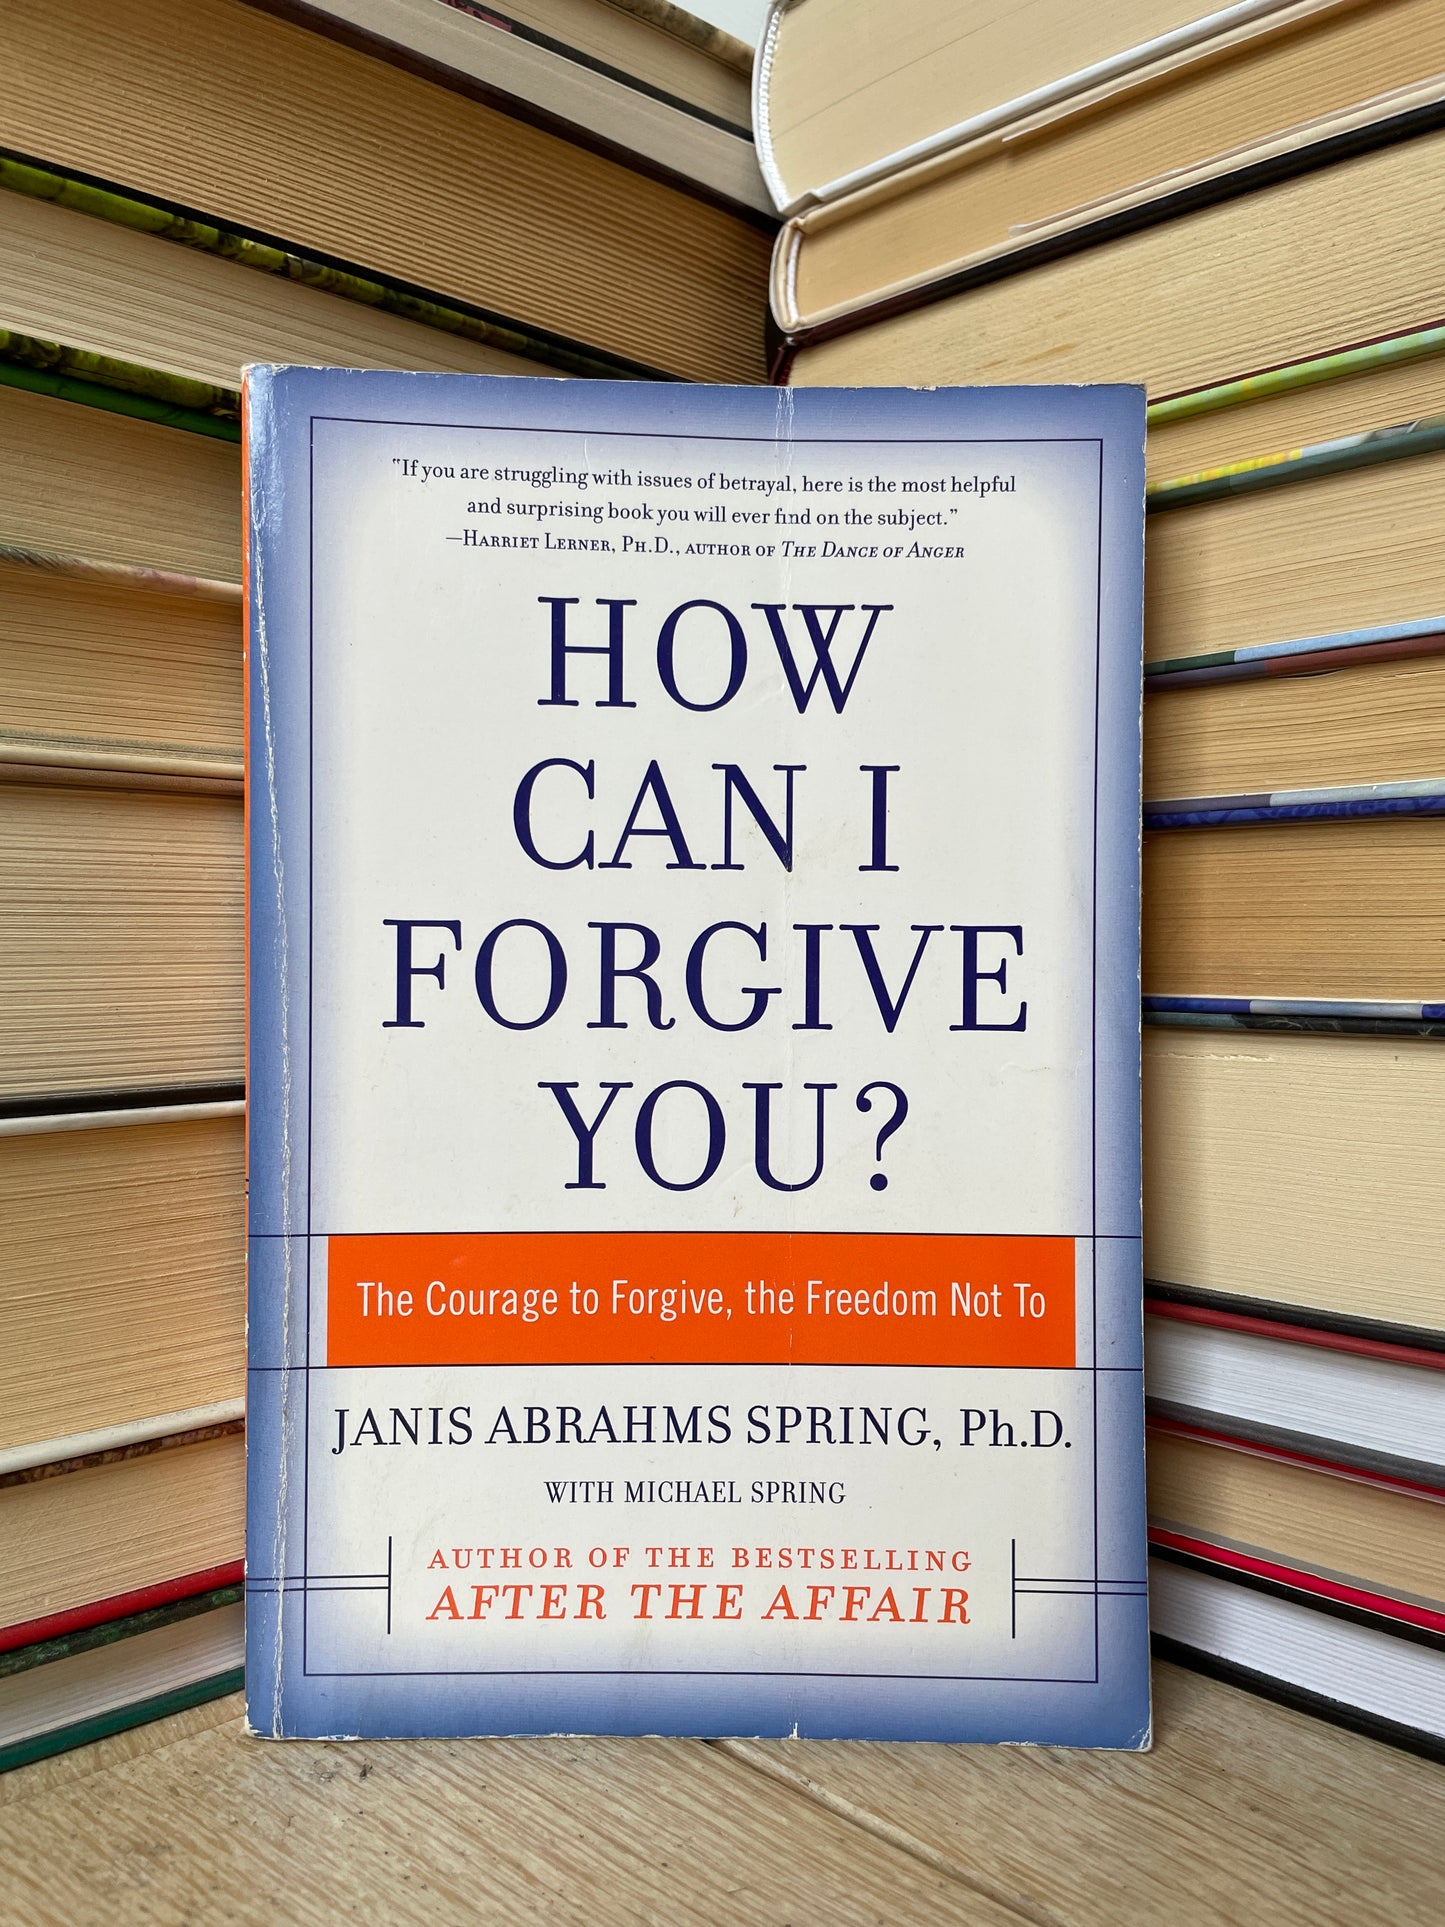 Janis Abrahms Spring, Ph. D. - How Can I Forgive You